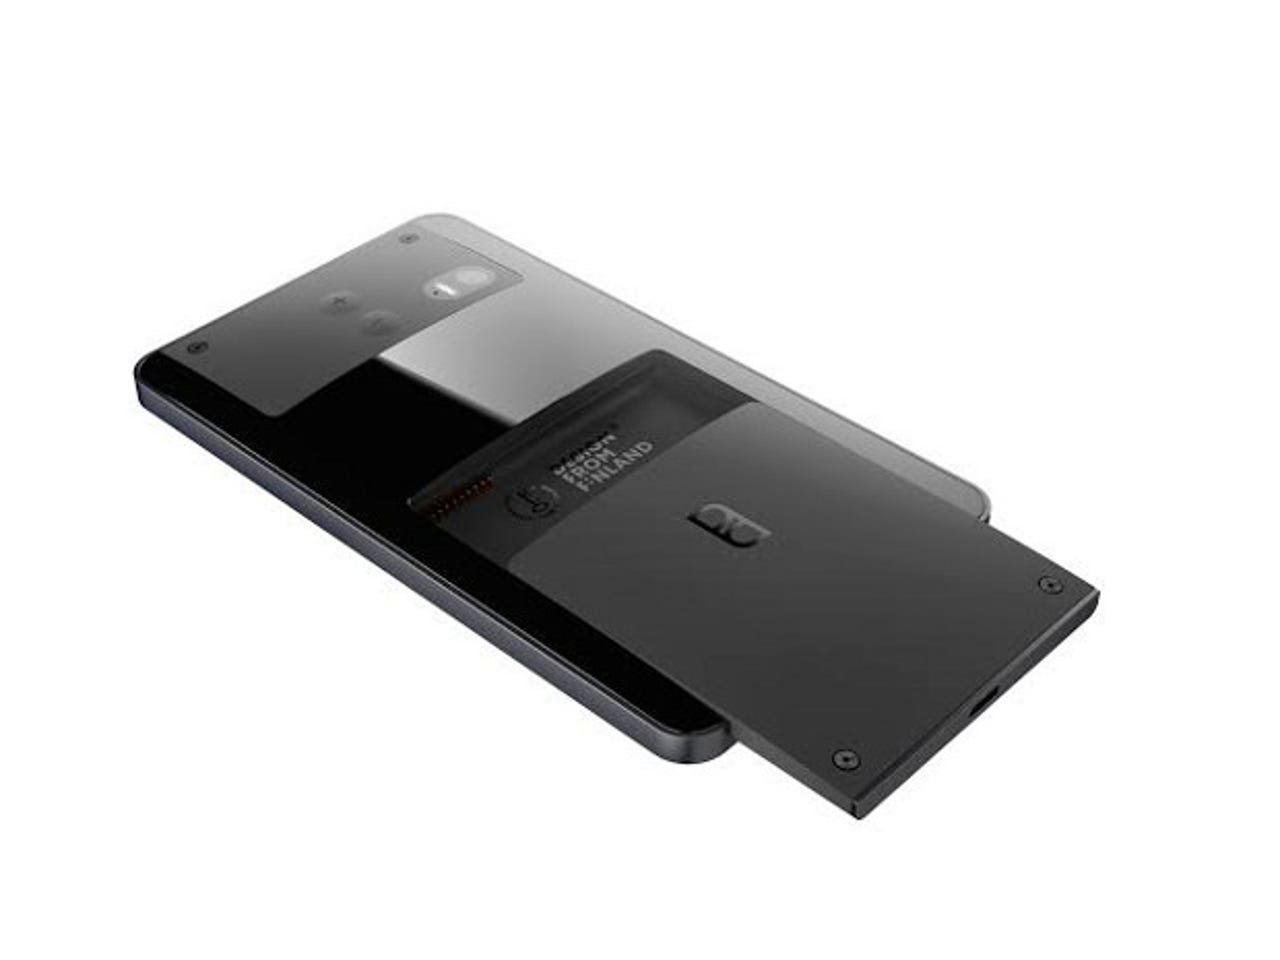 The latest design of the Puzzlephone